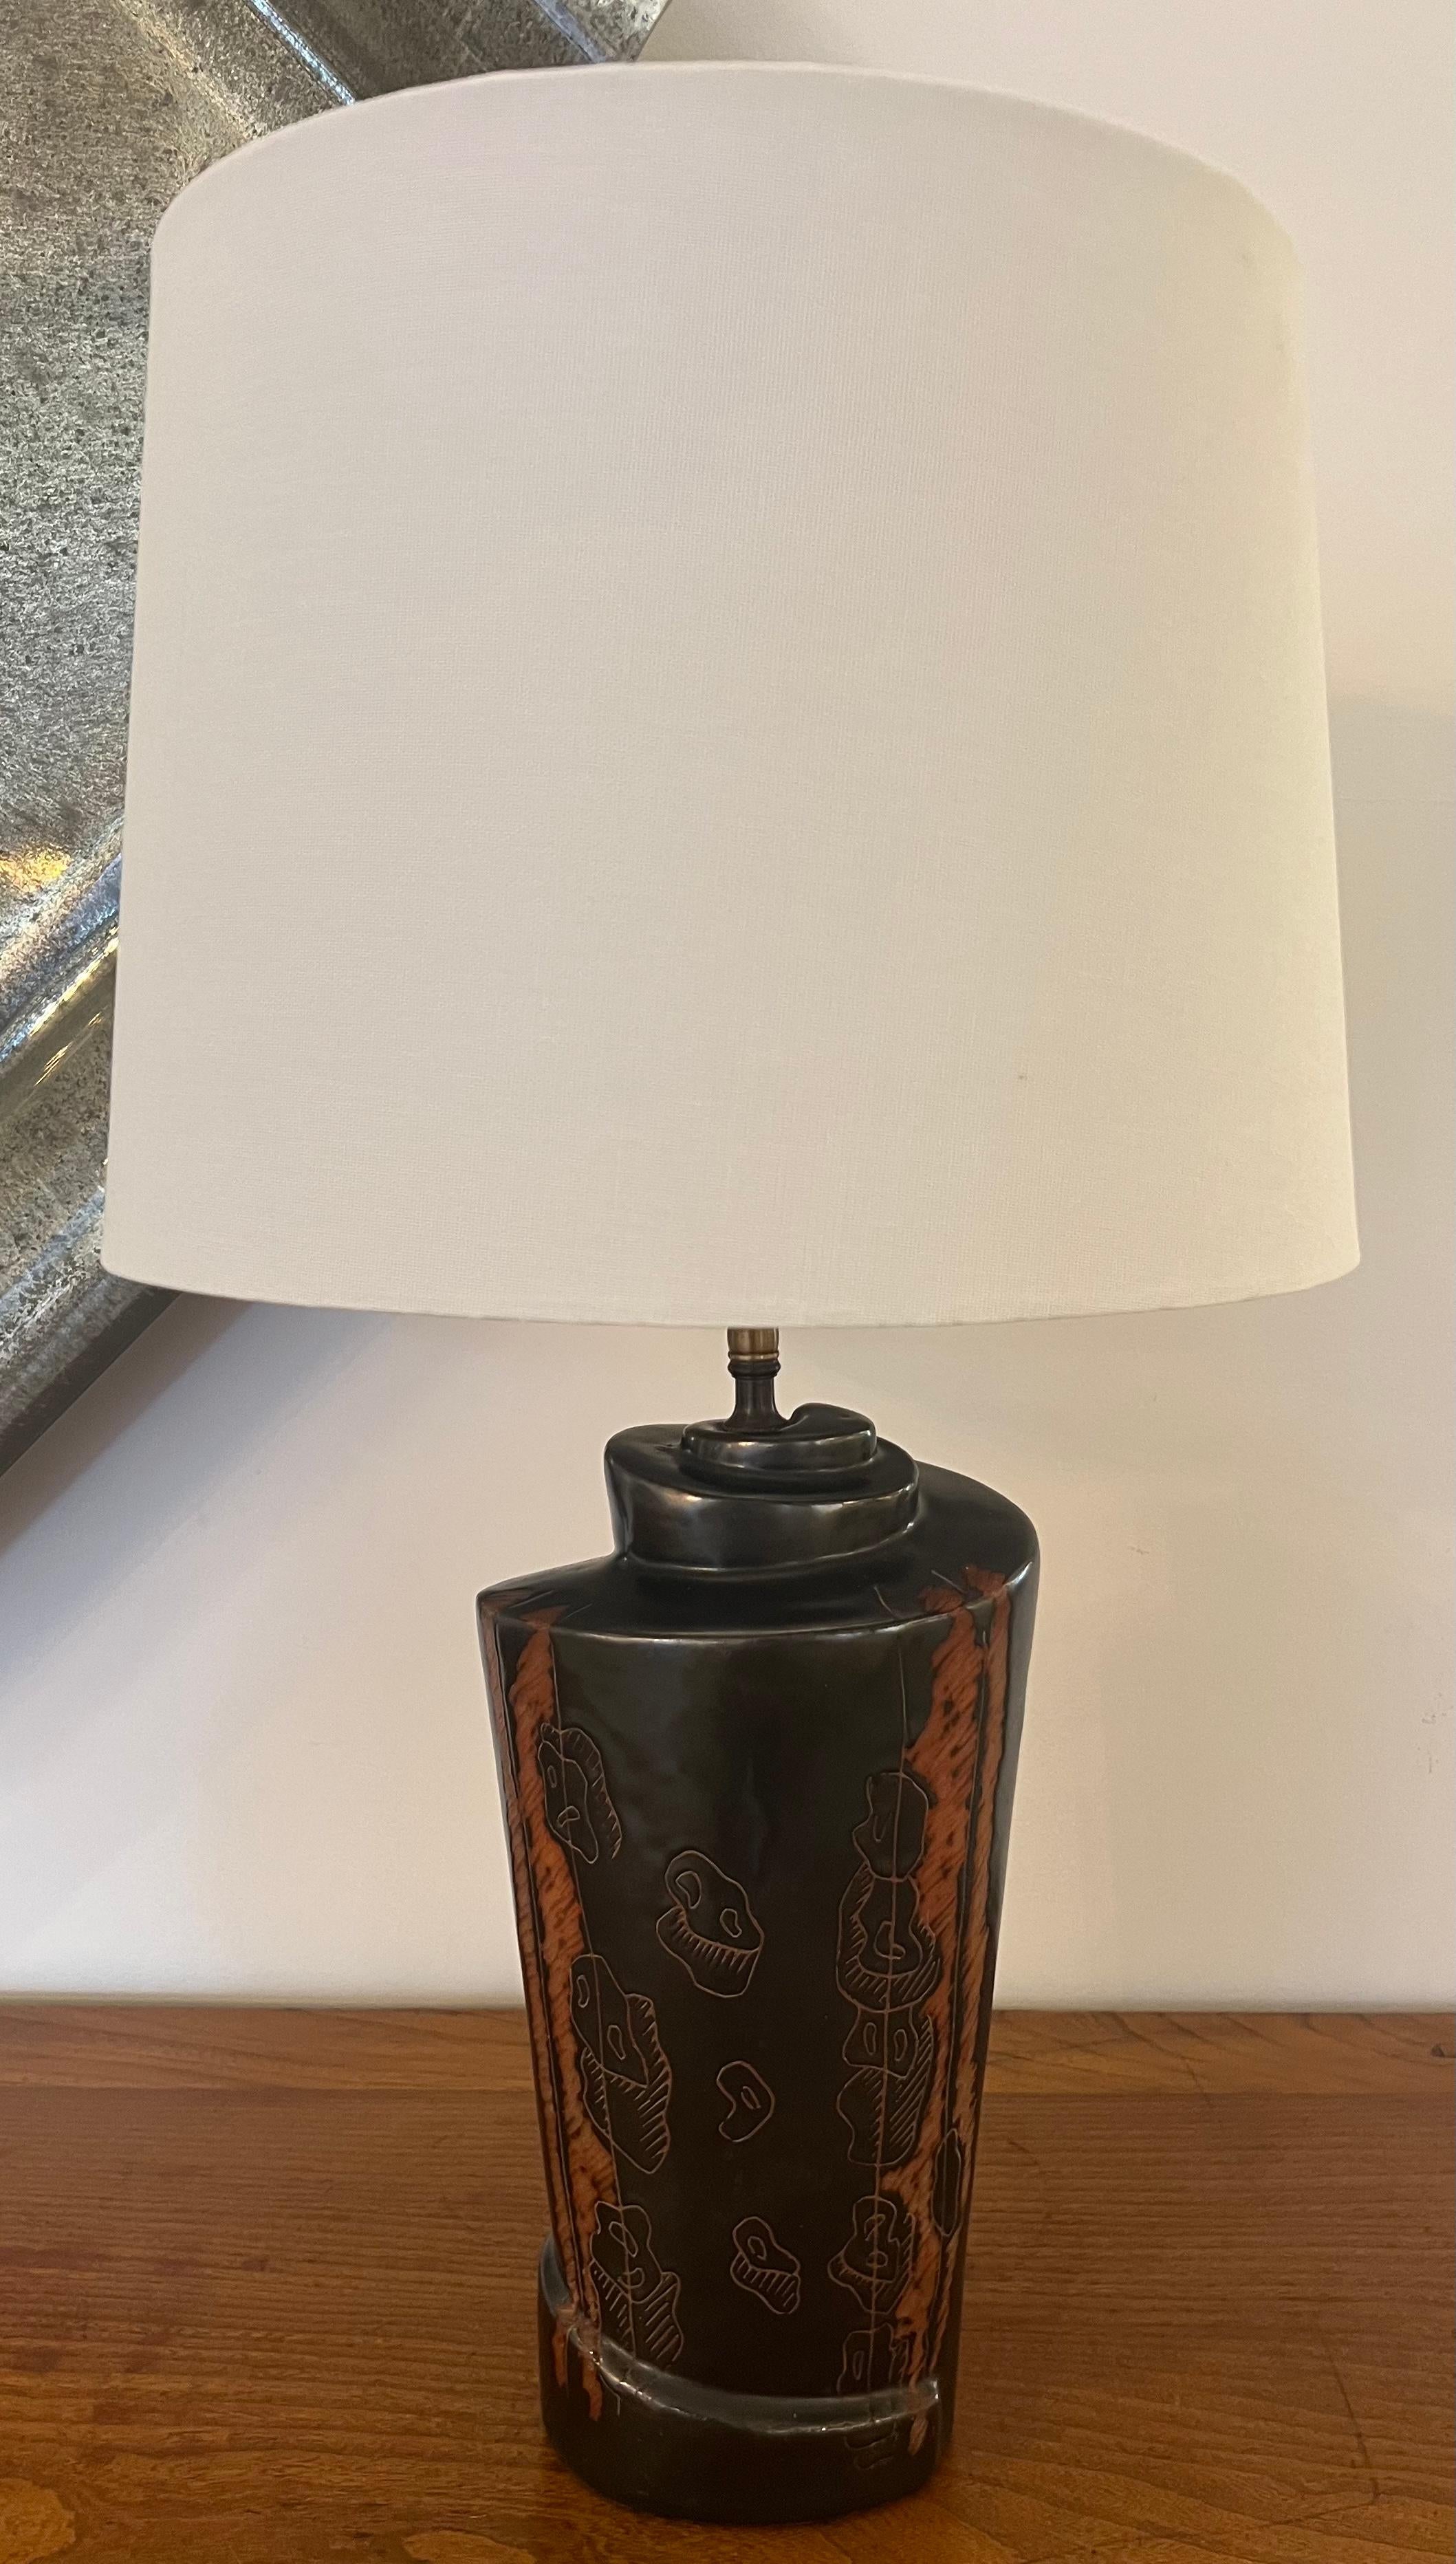 Pair of original art pottery table lamps by famed American artist, Marianna con Allesch. Signed. Rewired with aged brass double sockets and brown cloth cords. The ceramic bodies are 13” tall in colors of matte gunmetal and rust brown with incised